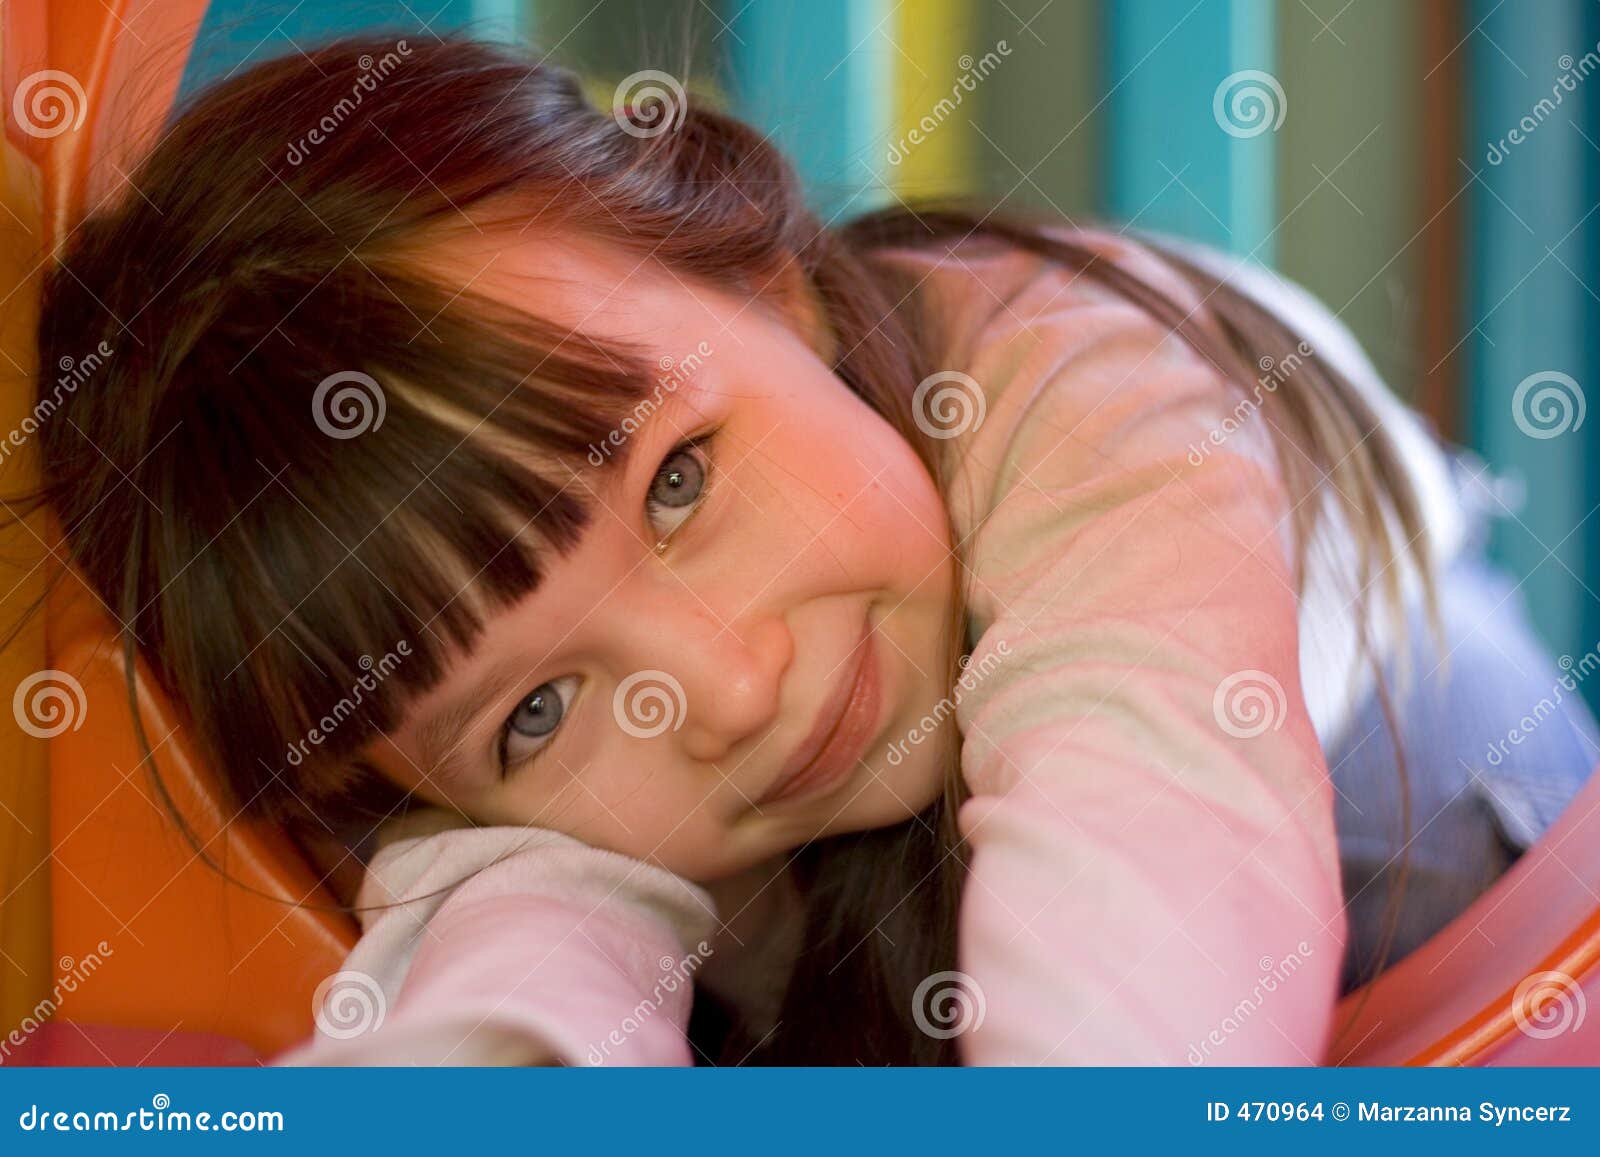 girl in tunel on playground